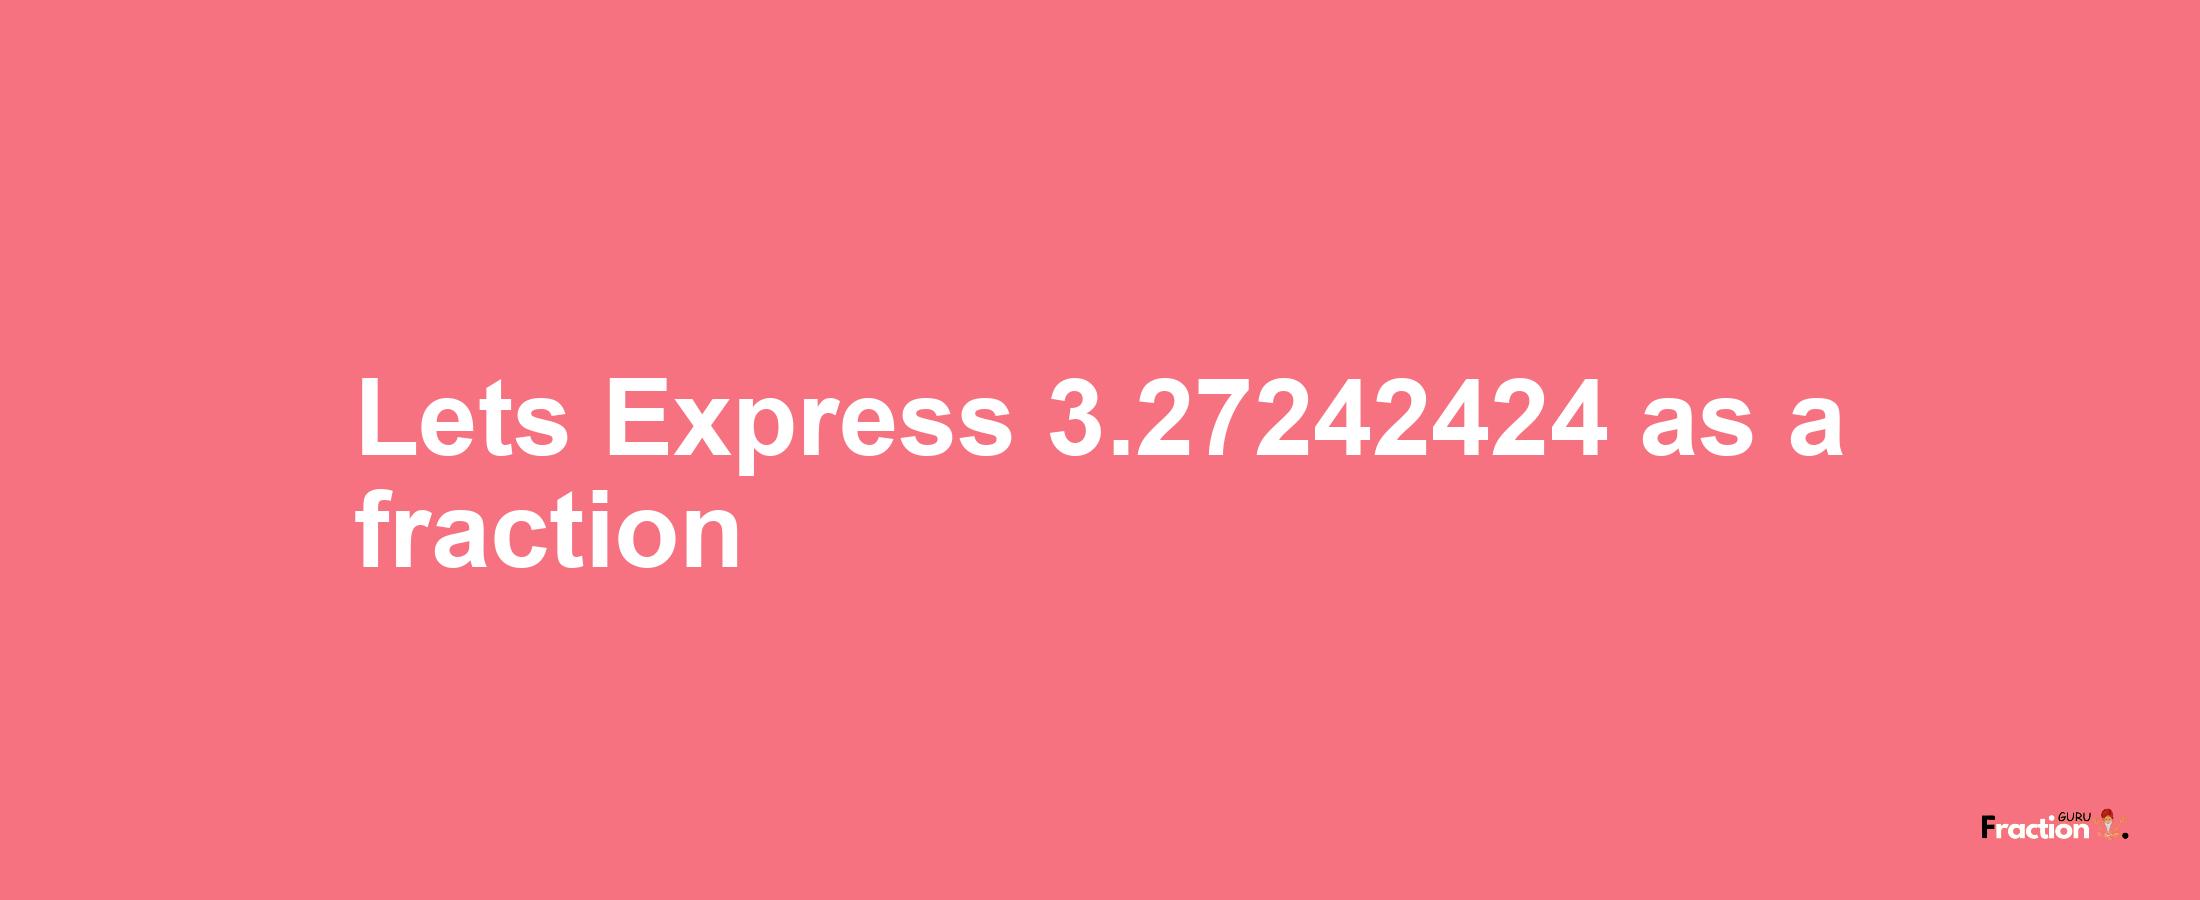 Lets Express 3.27242424 as afraction